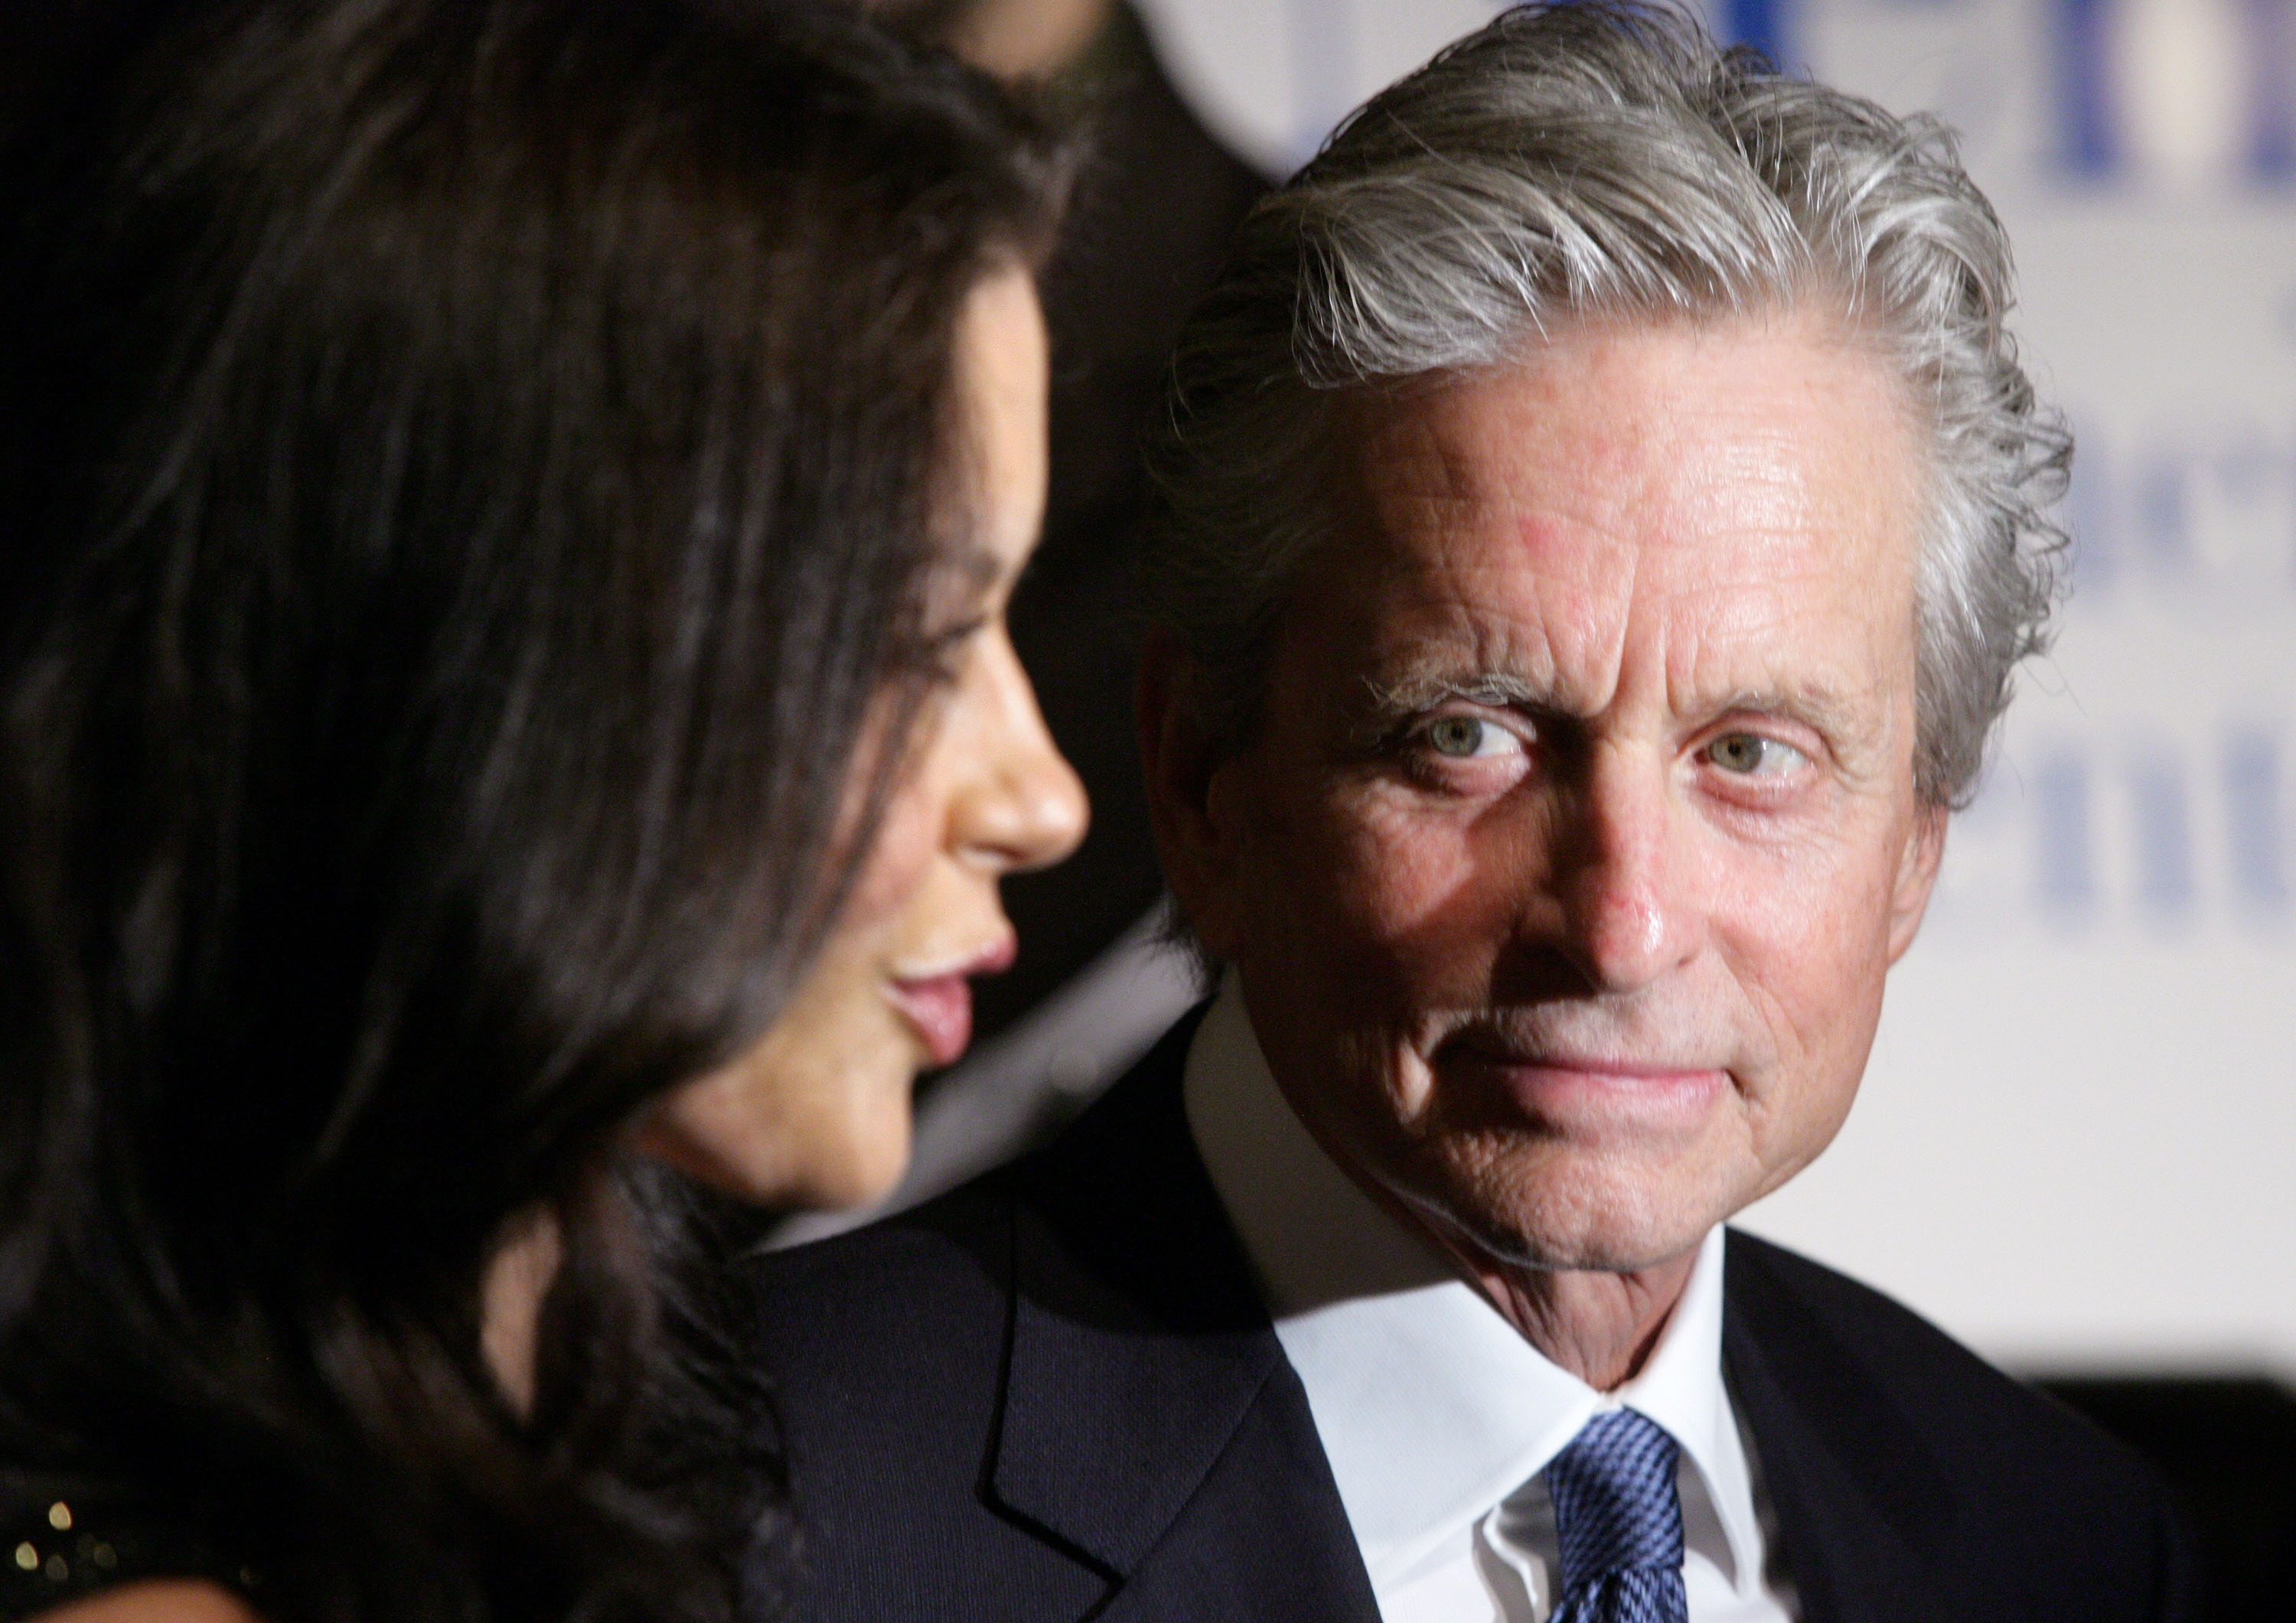 Catherine Zeta-Jones and Michael Douglas attend the 12th annual Monte Cristo Award presentation at The Edison Ballroom, on April 16, 2012, in New York City. | Source: Getty Images